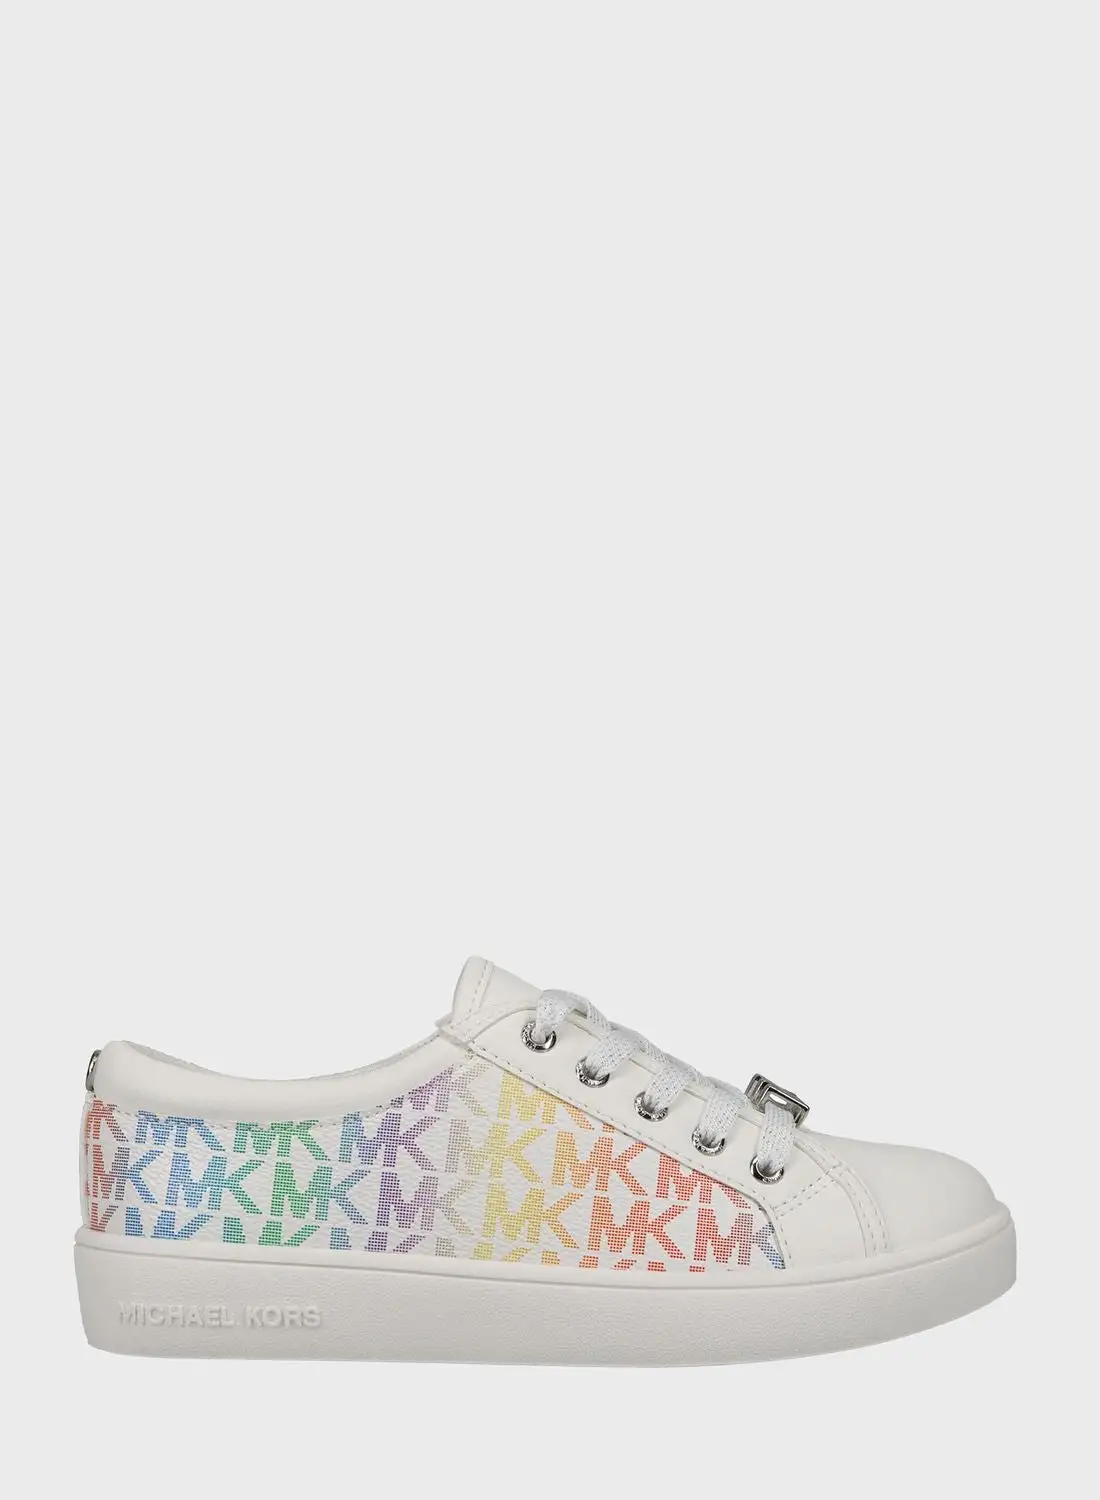 Michael Kors Youth Jem Monogram Low Top Lace Up Sneakers